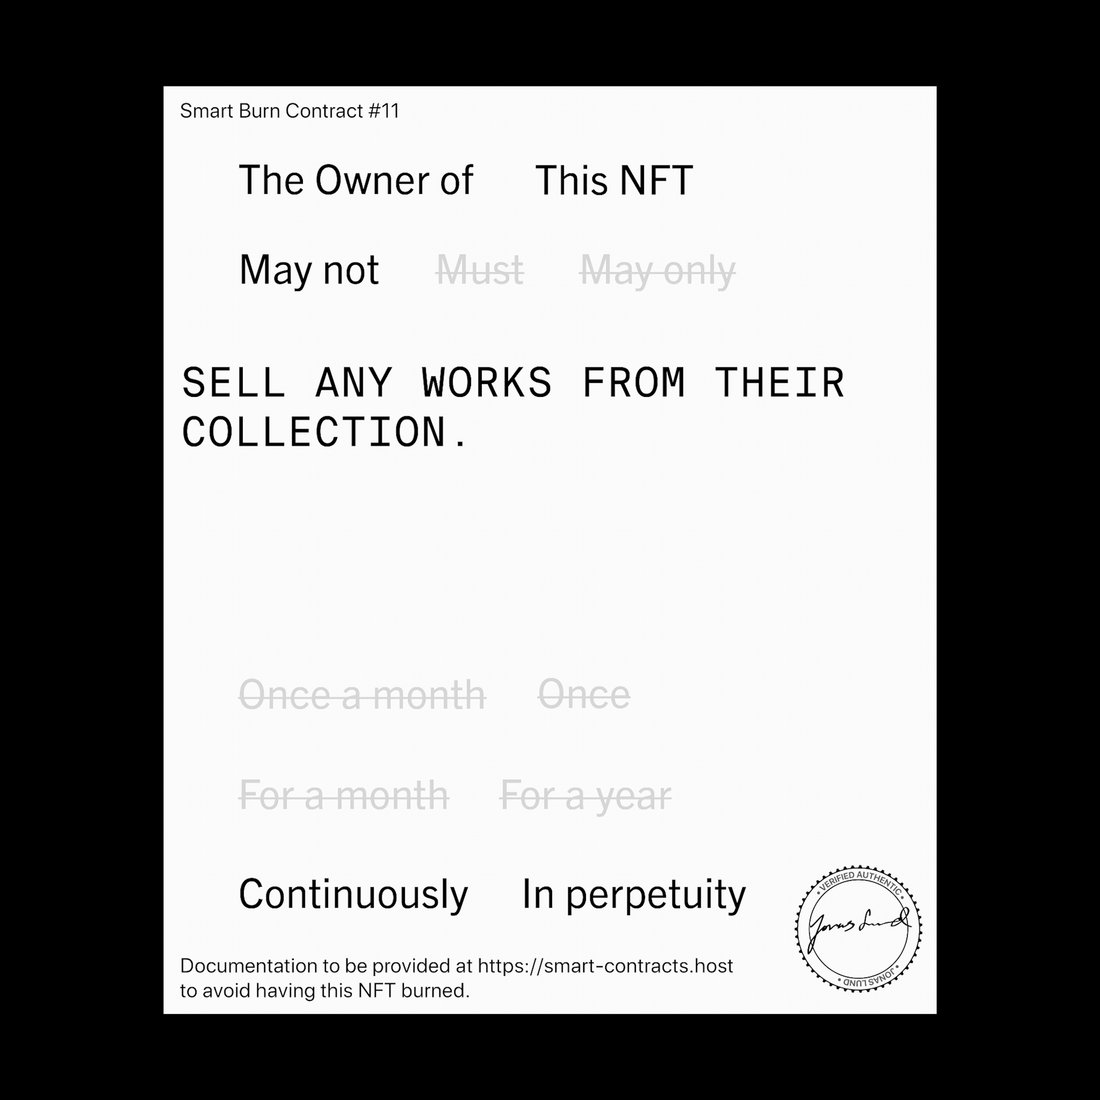 “Smart Burn Contract – Hoarder”, by Jonas Lund, finds its place in the ongoing history of “protocols” or “certificates”, which we find in conceptual and minimal art.  Courtesy of the artist